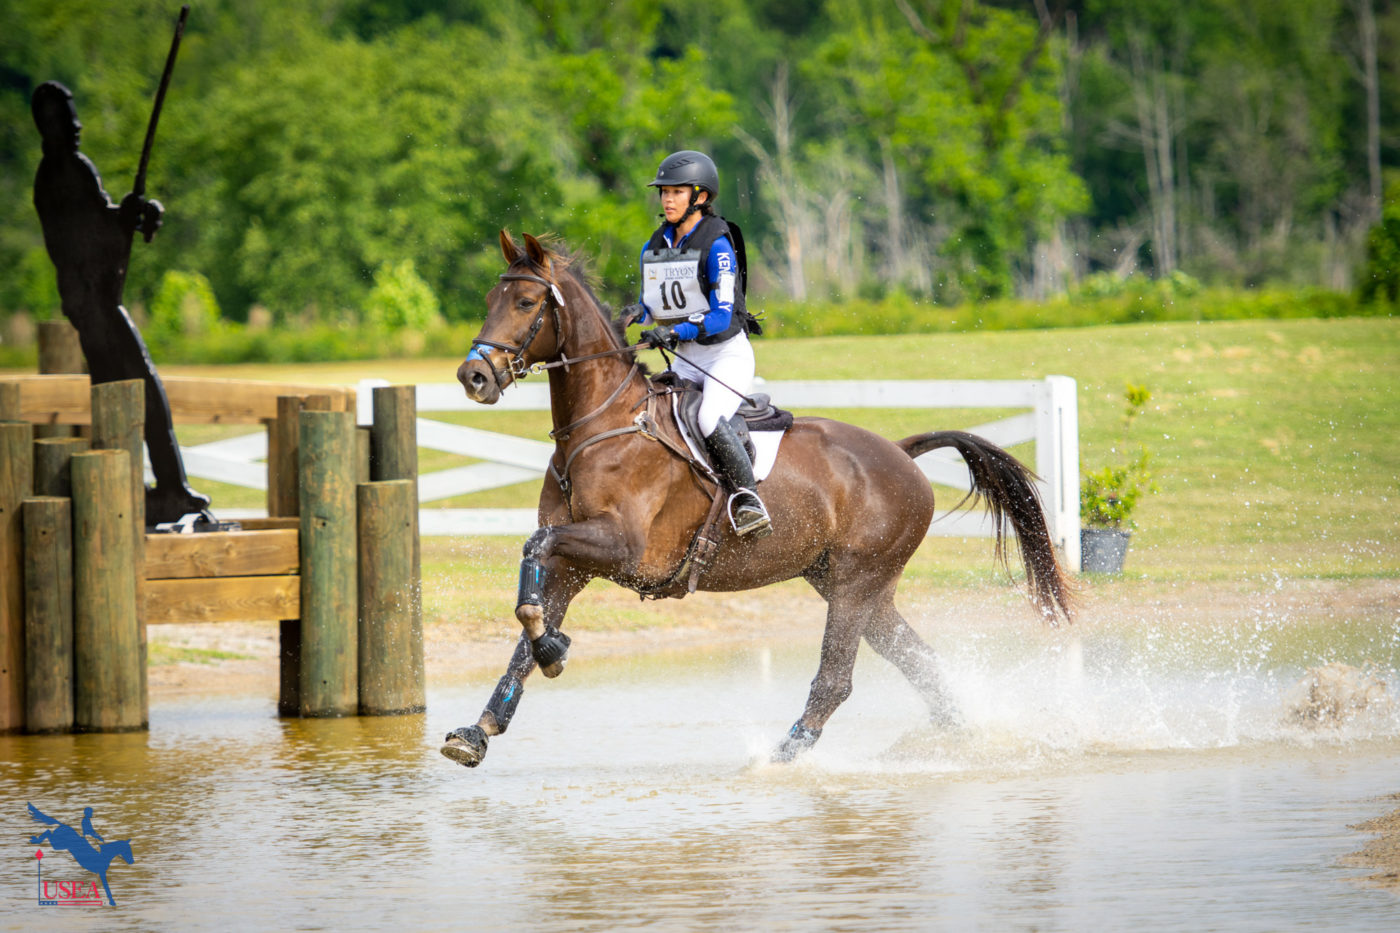 Catherine Shu and 24 Karat Fernhill galloped through the water for UK. USEA/Shelby Allen photo